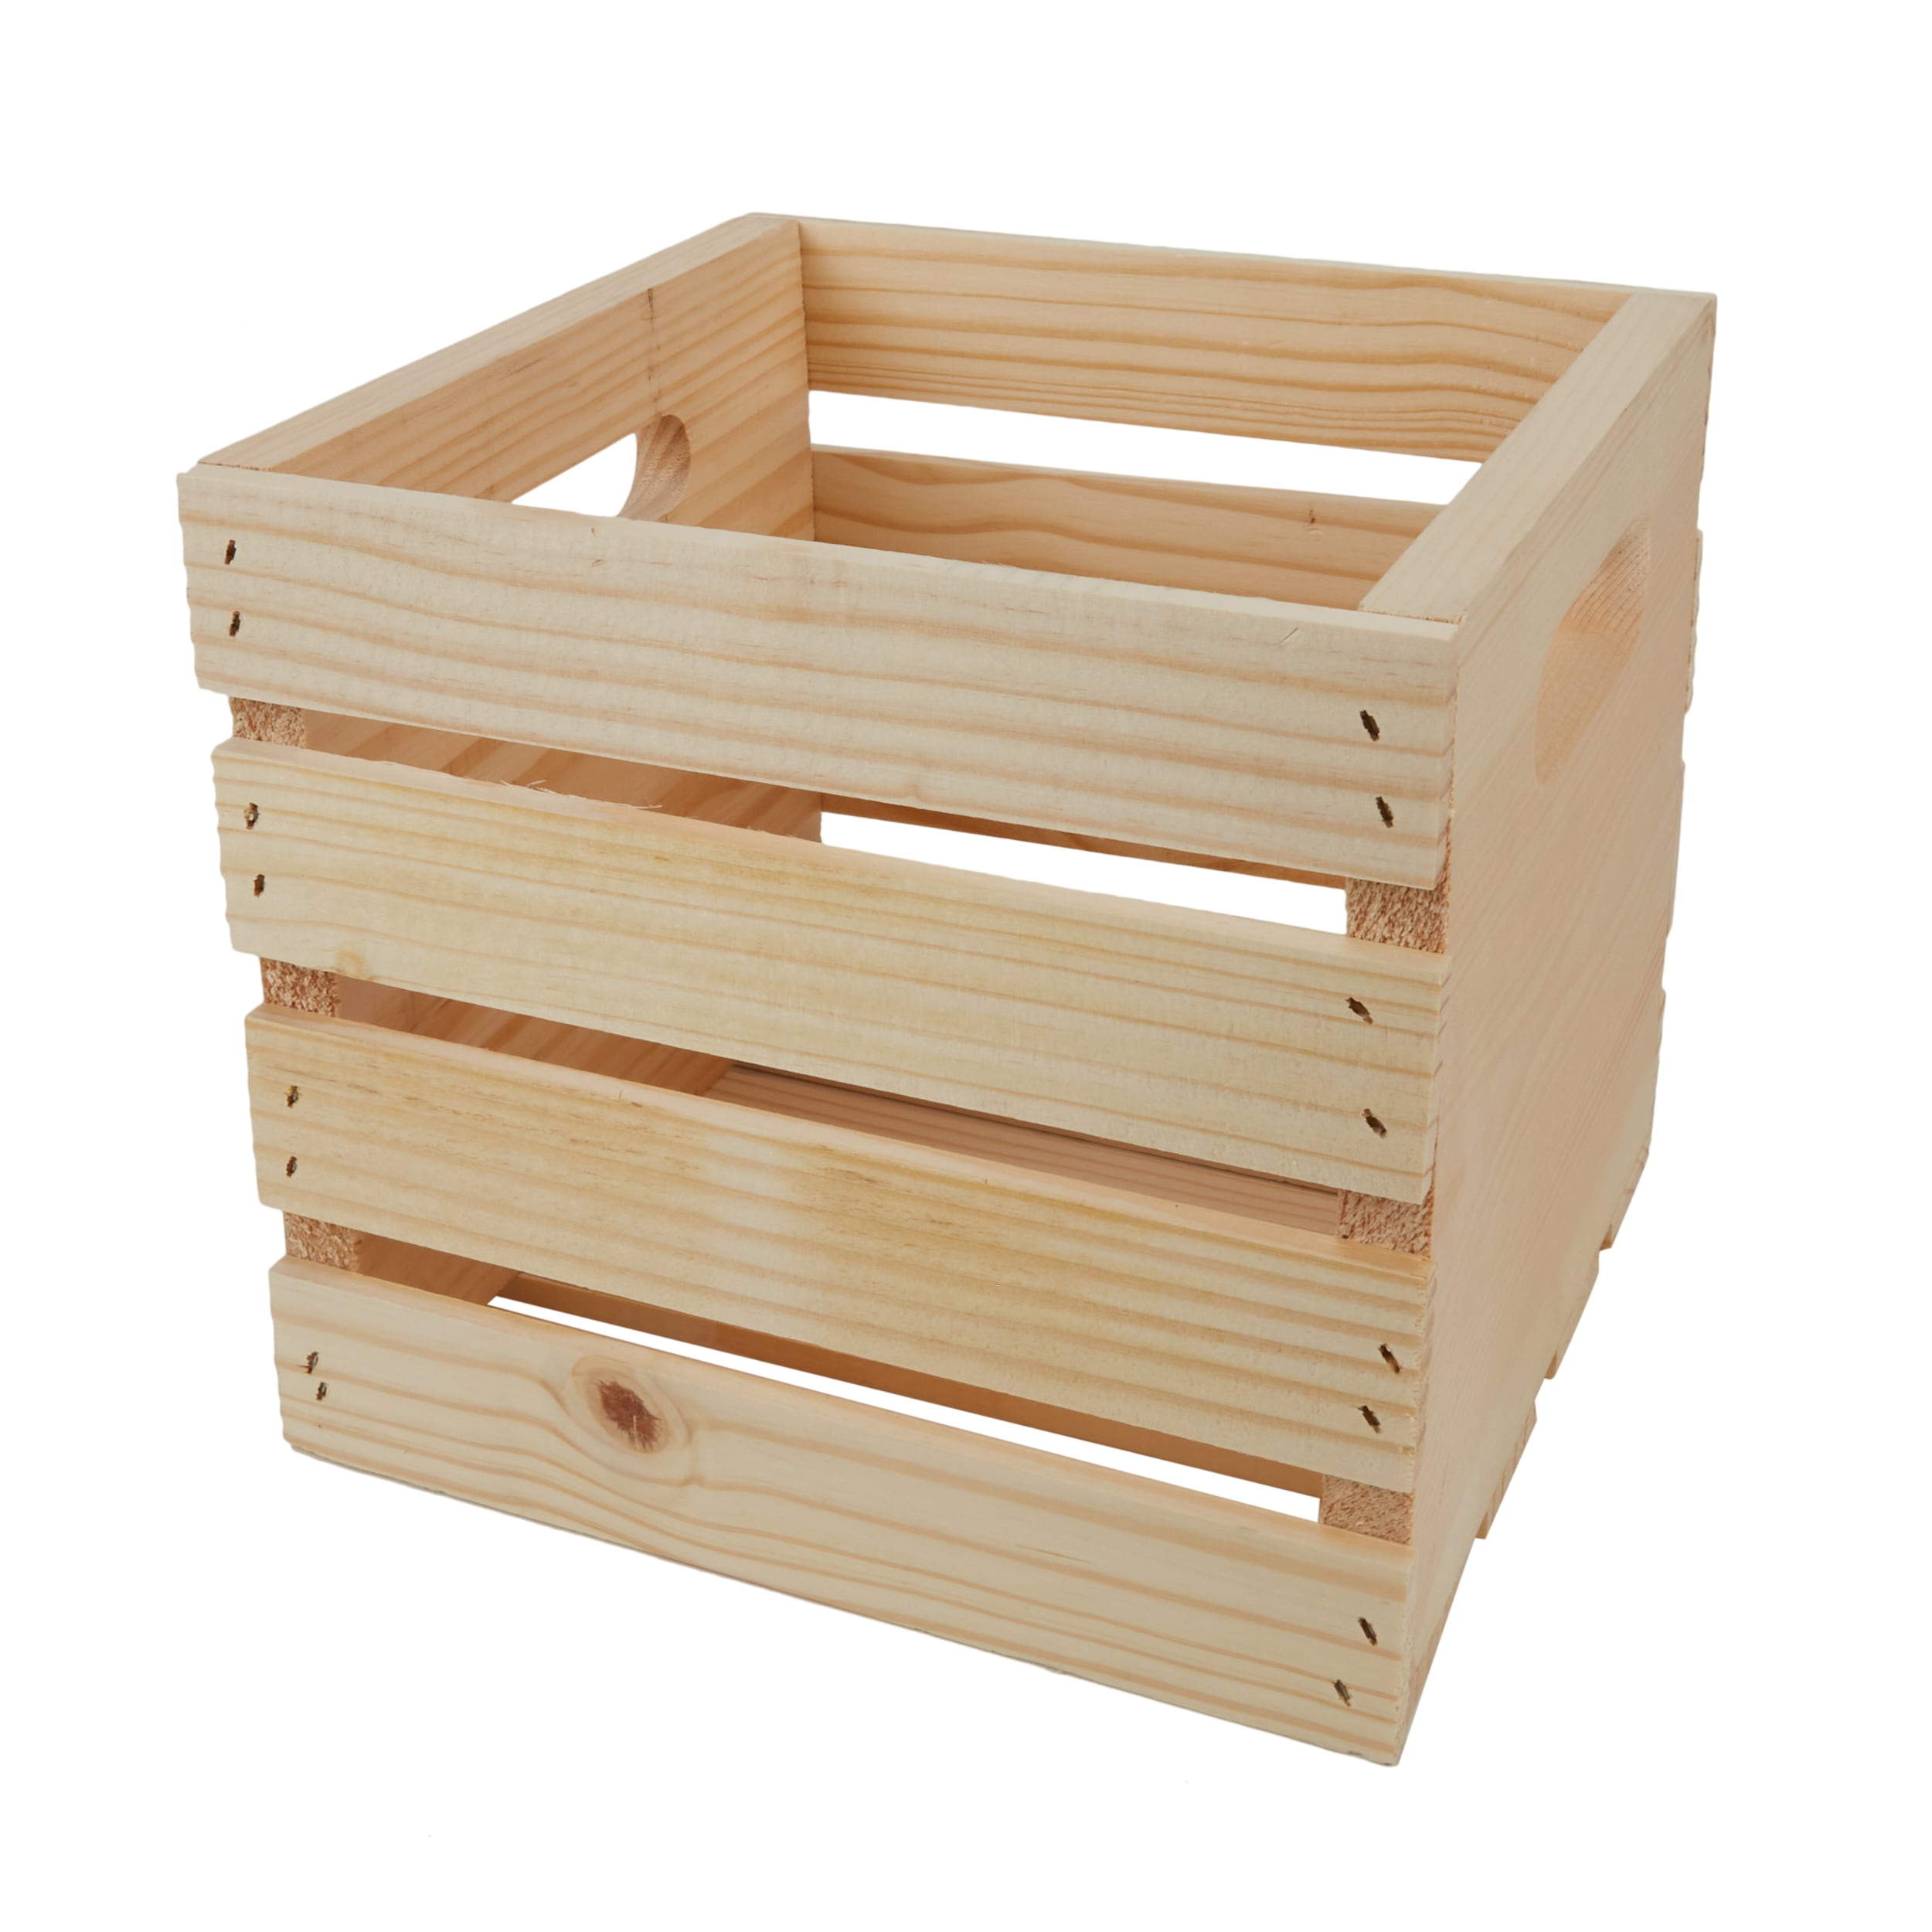 Wooden Crates, 14.5 X 9.4 X 5.9 Inch, Small Storage Boxes, Burnt